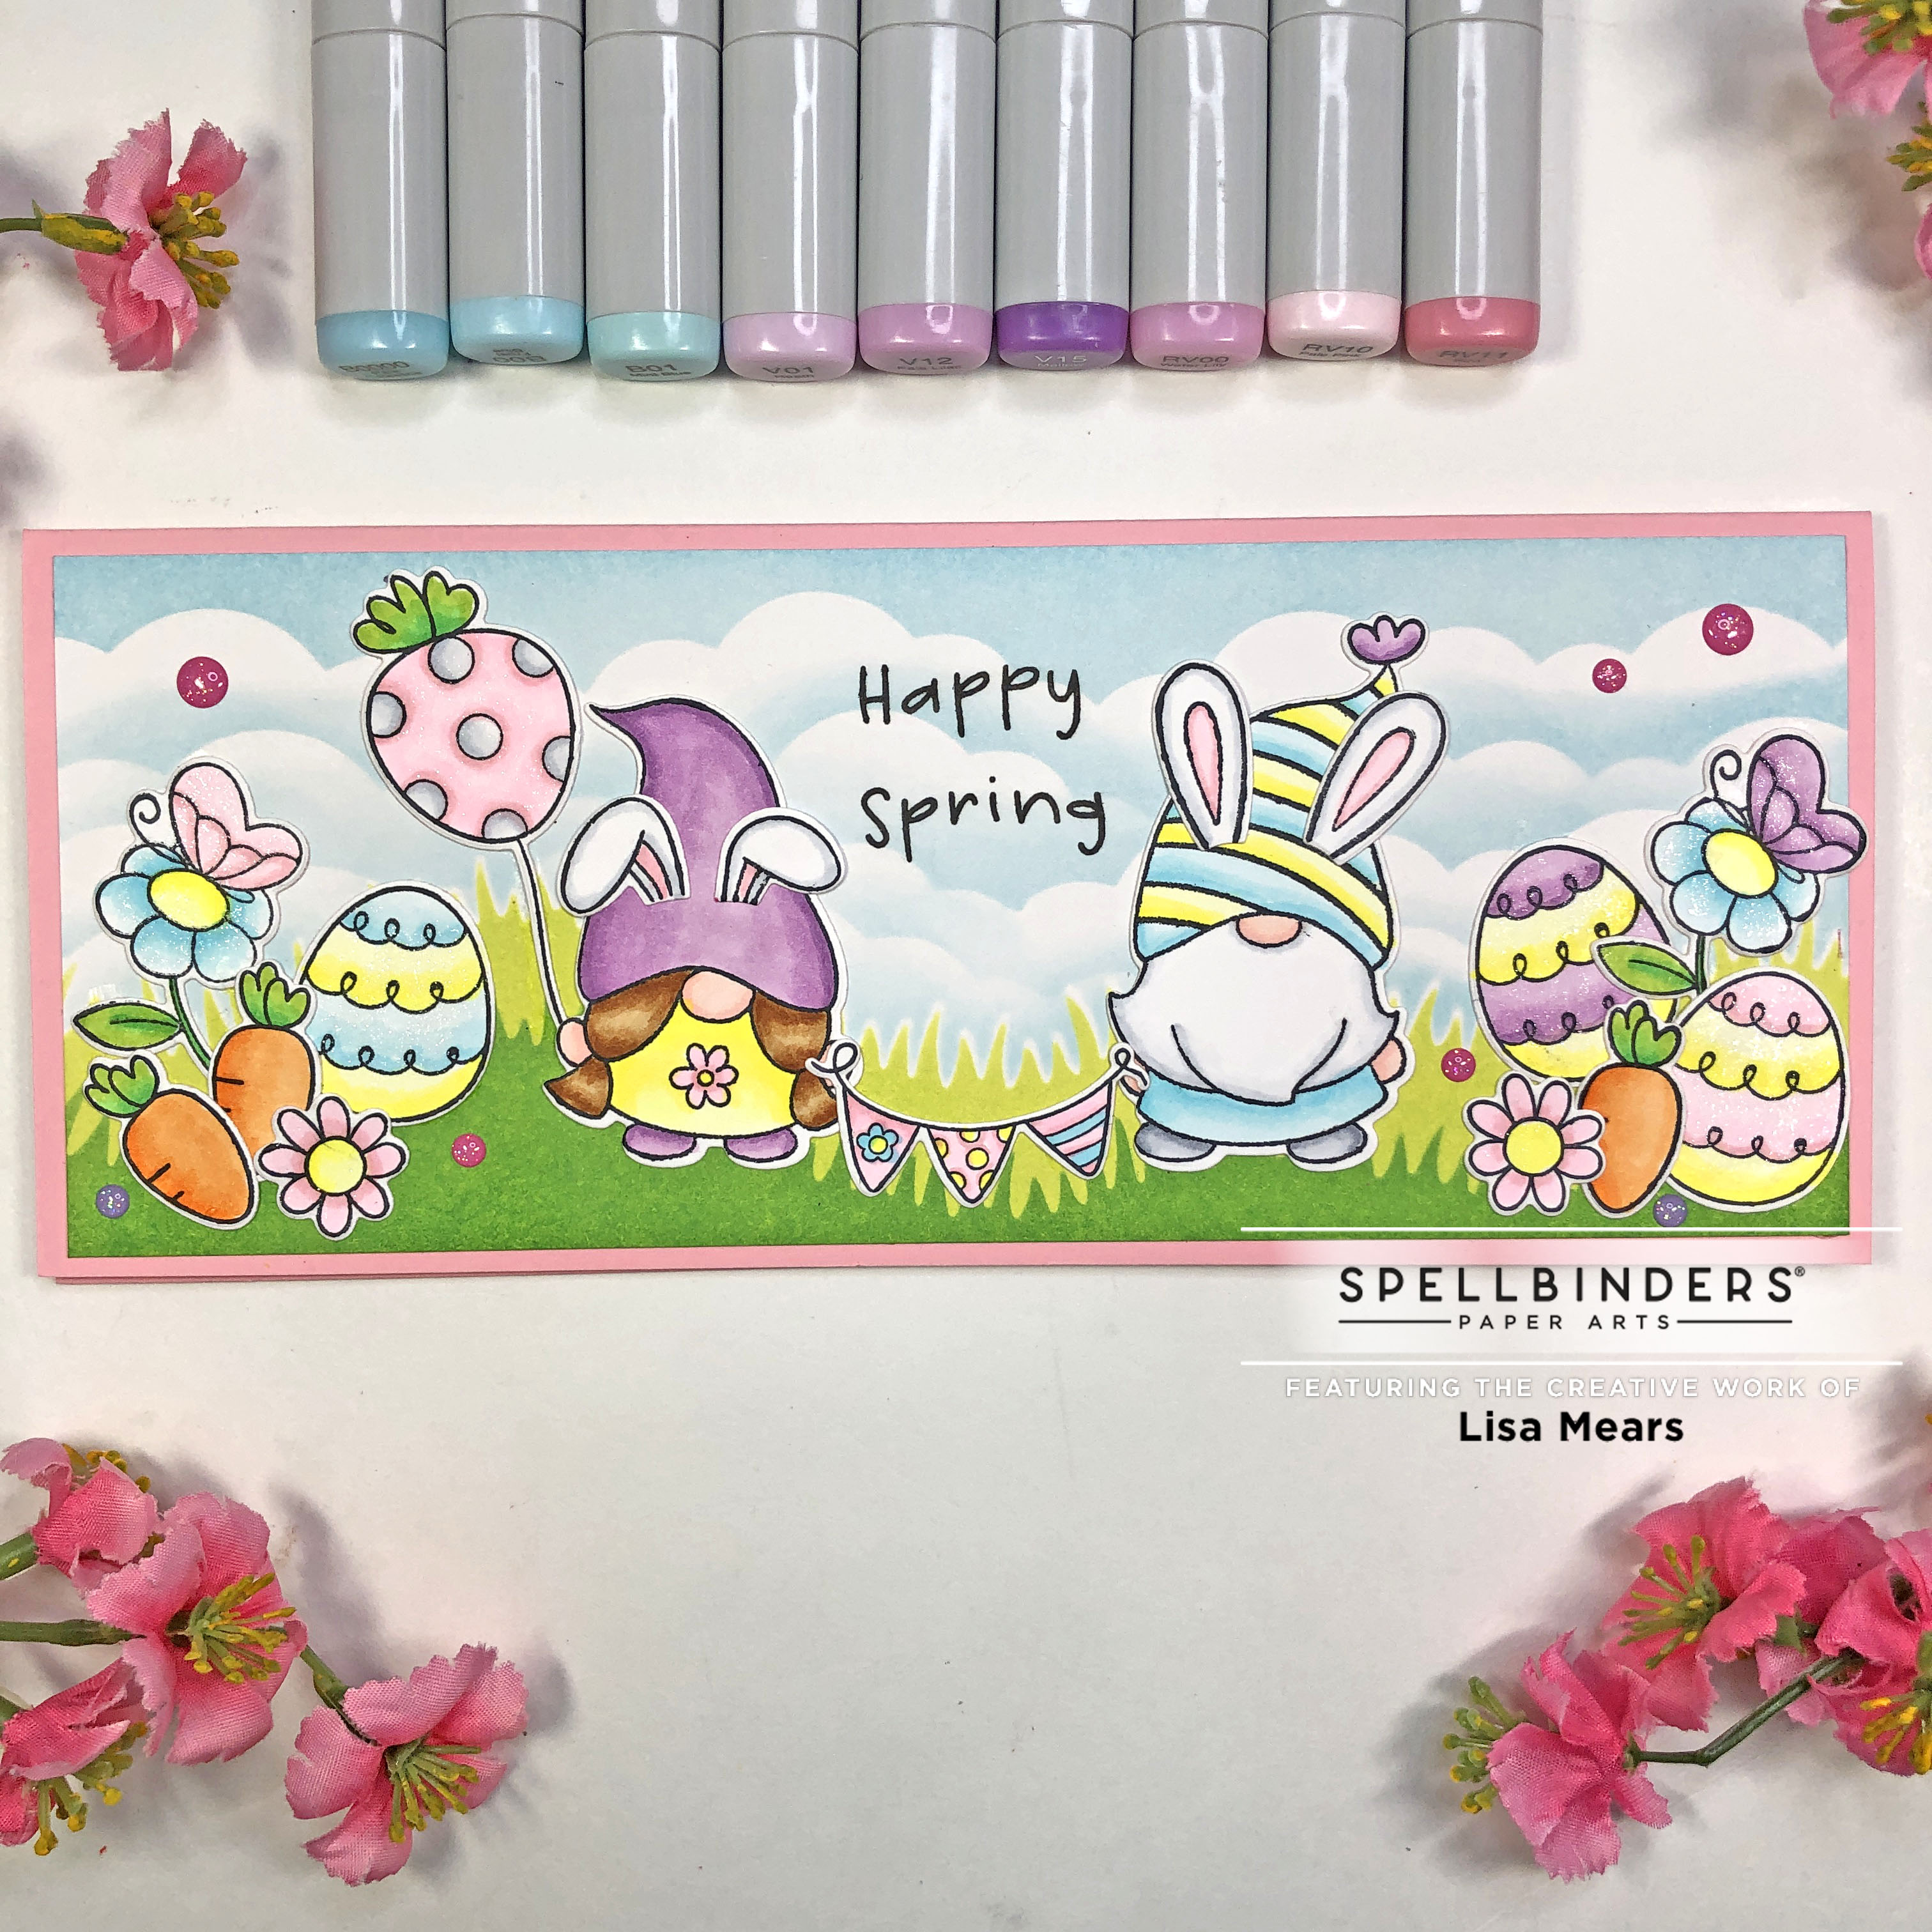 Spellbinders March 2022 Clear Stamp of the Month - Gnomes - Spring Card - Easter Card - Slimline Scene Card